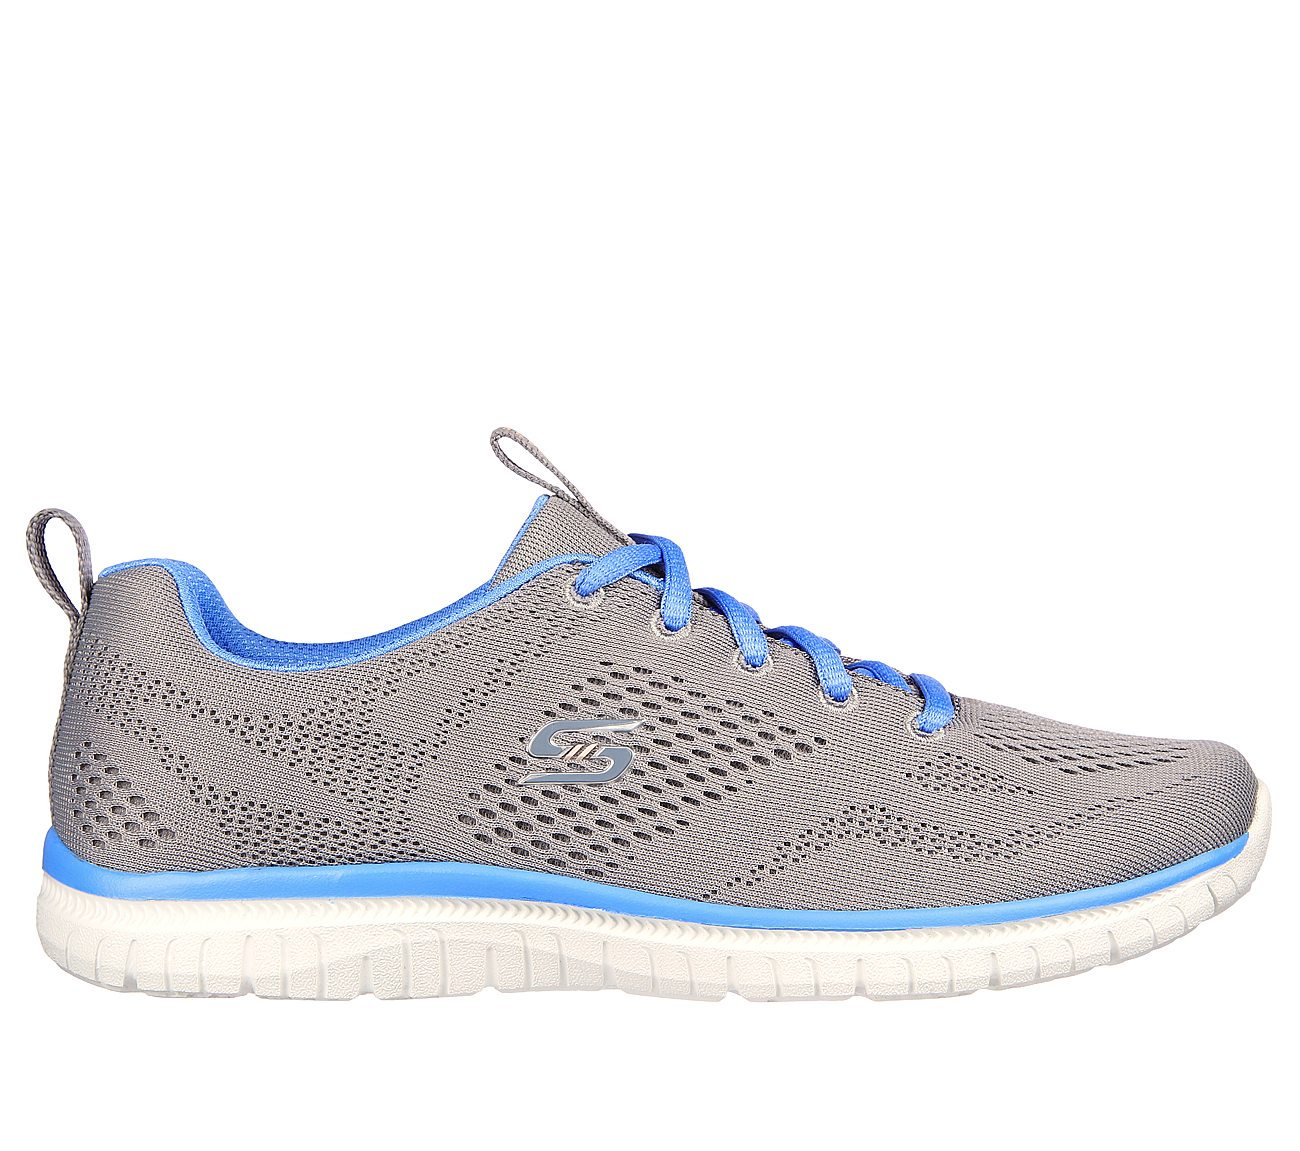 VIRTUE-KIND FAVOR, GREY/BLUE Footwear Lateral View